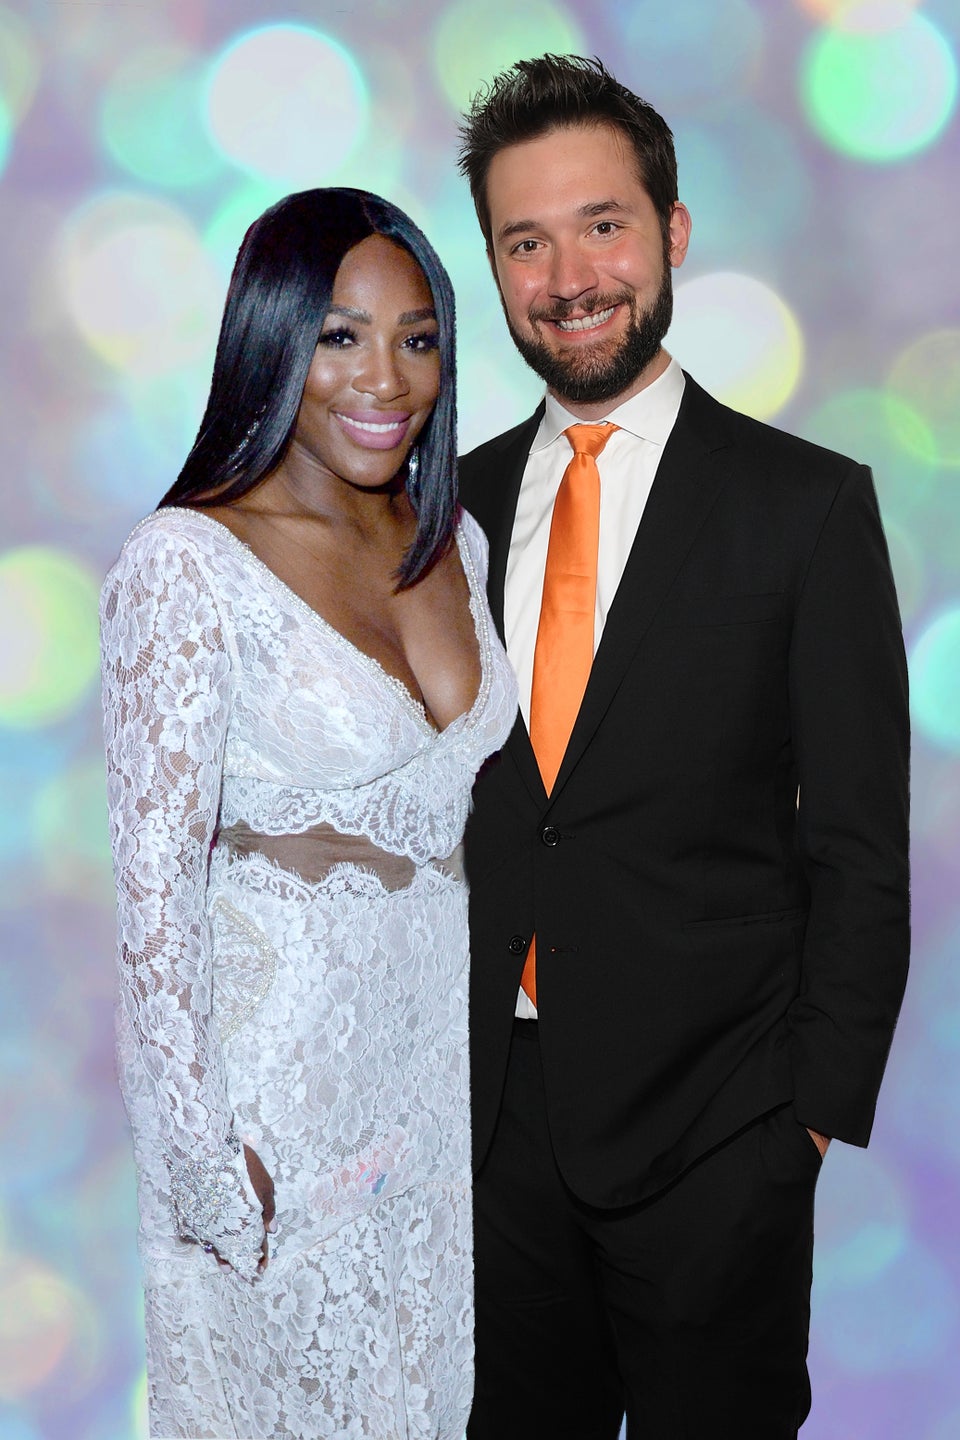 Serena Williams On Finding Love In An Unexpected Place: ‘I Never Thought I Would Have Married A White Guy’